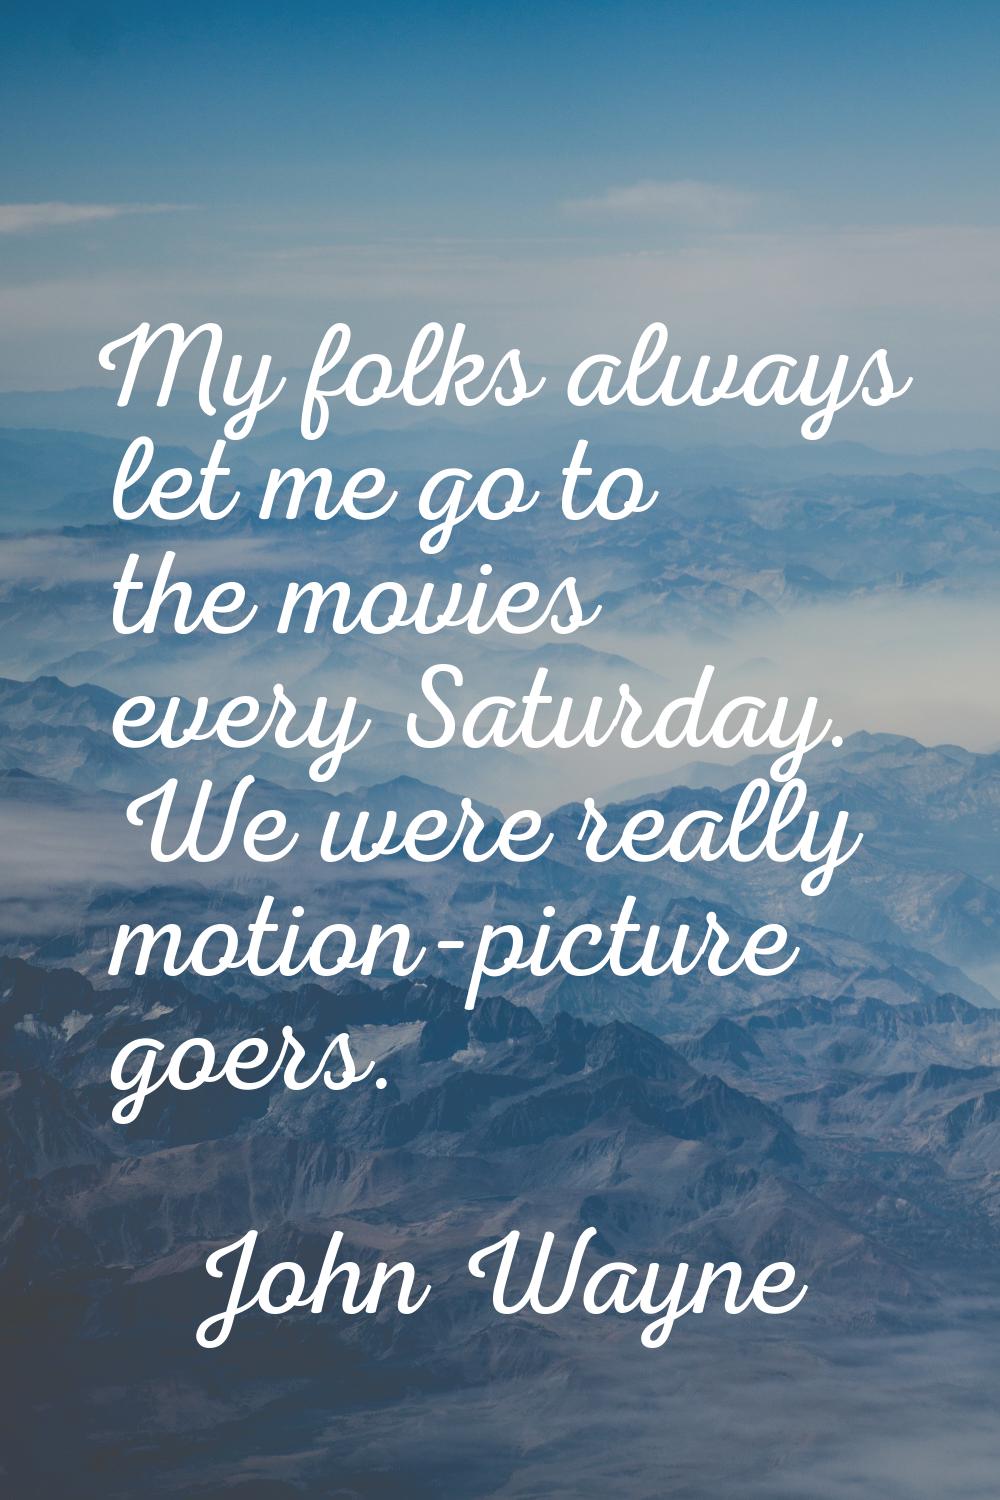 My folks always let me go to the movies every Saturday. We were really motion-picture goers.